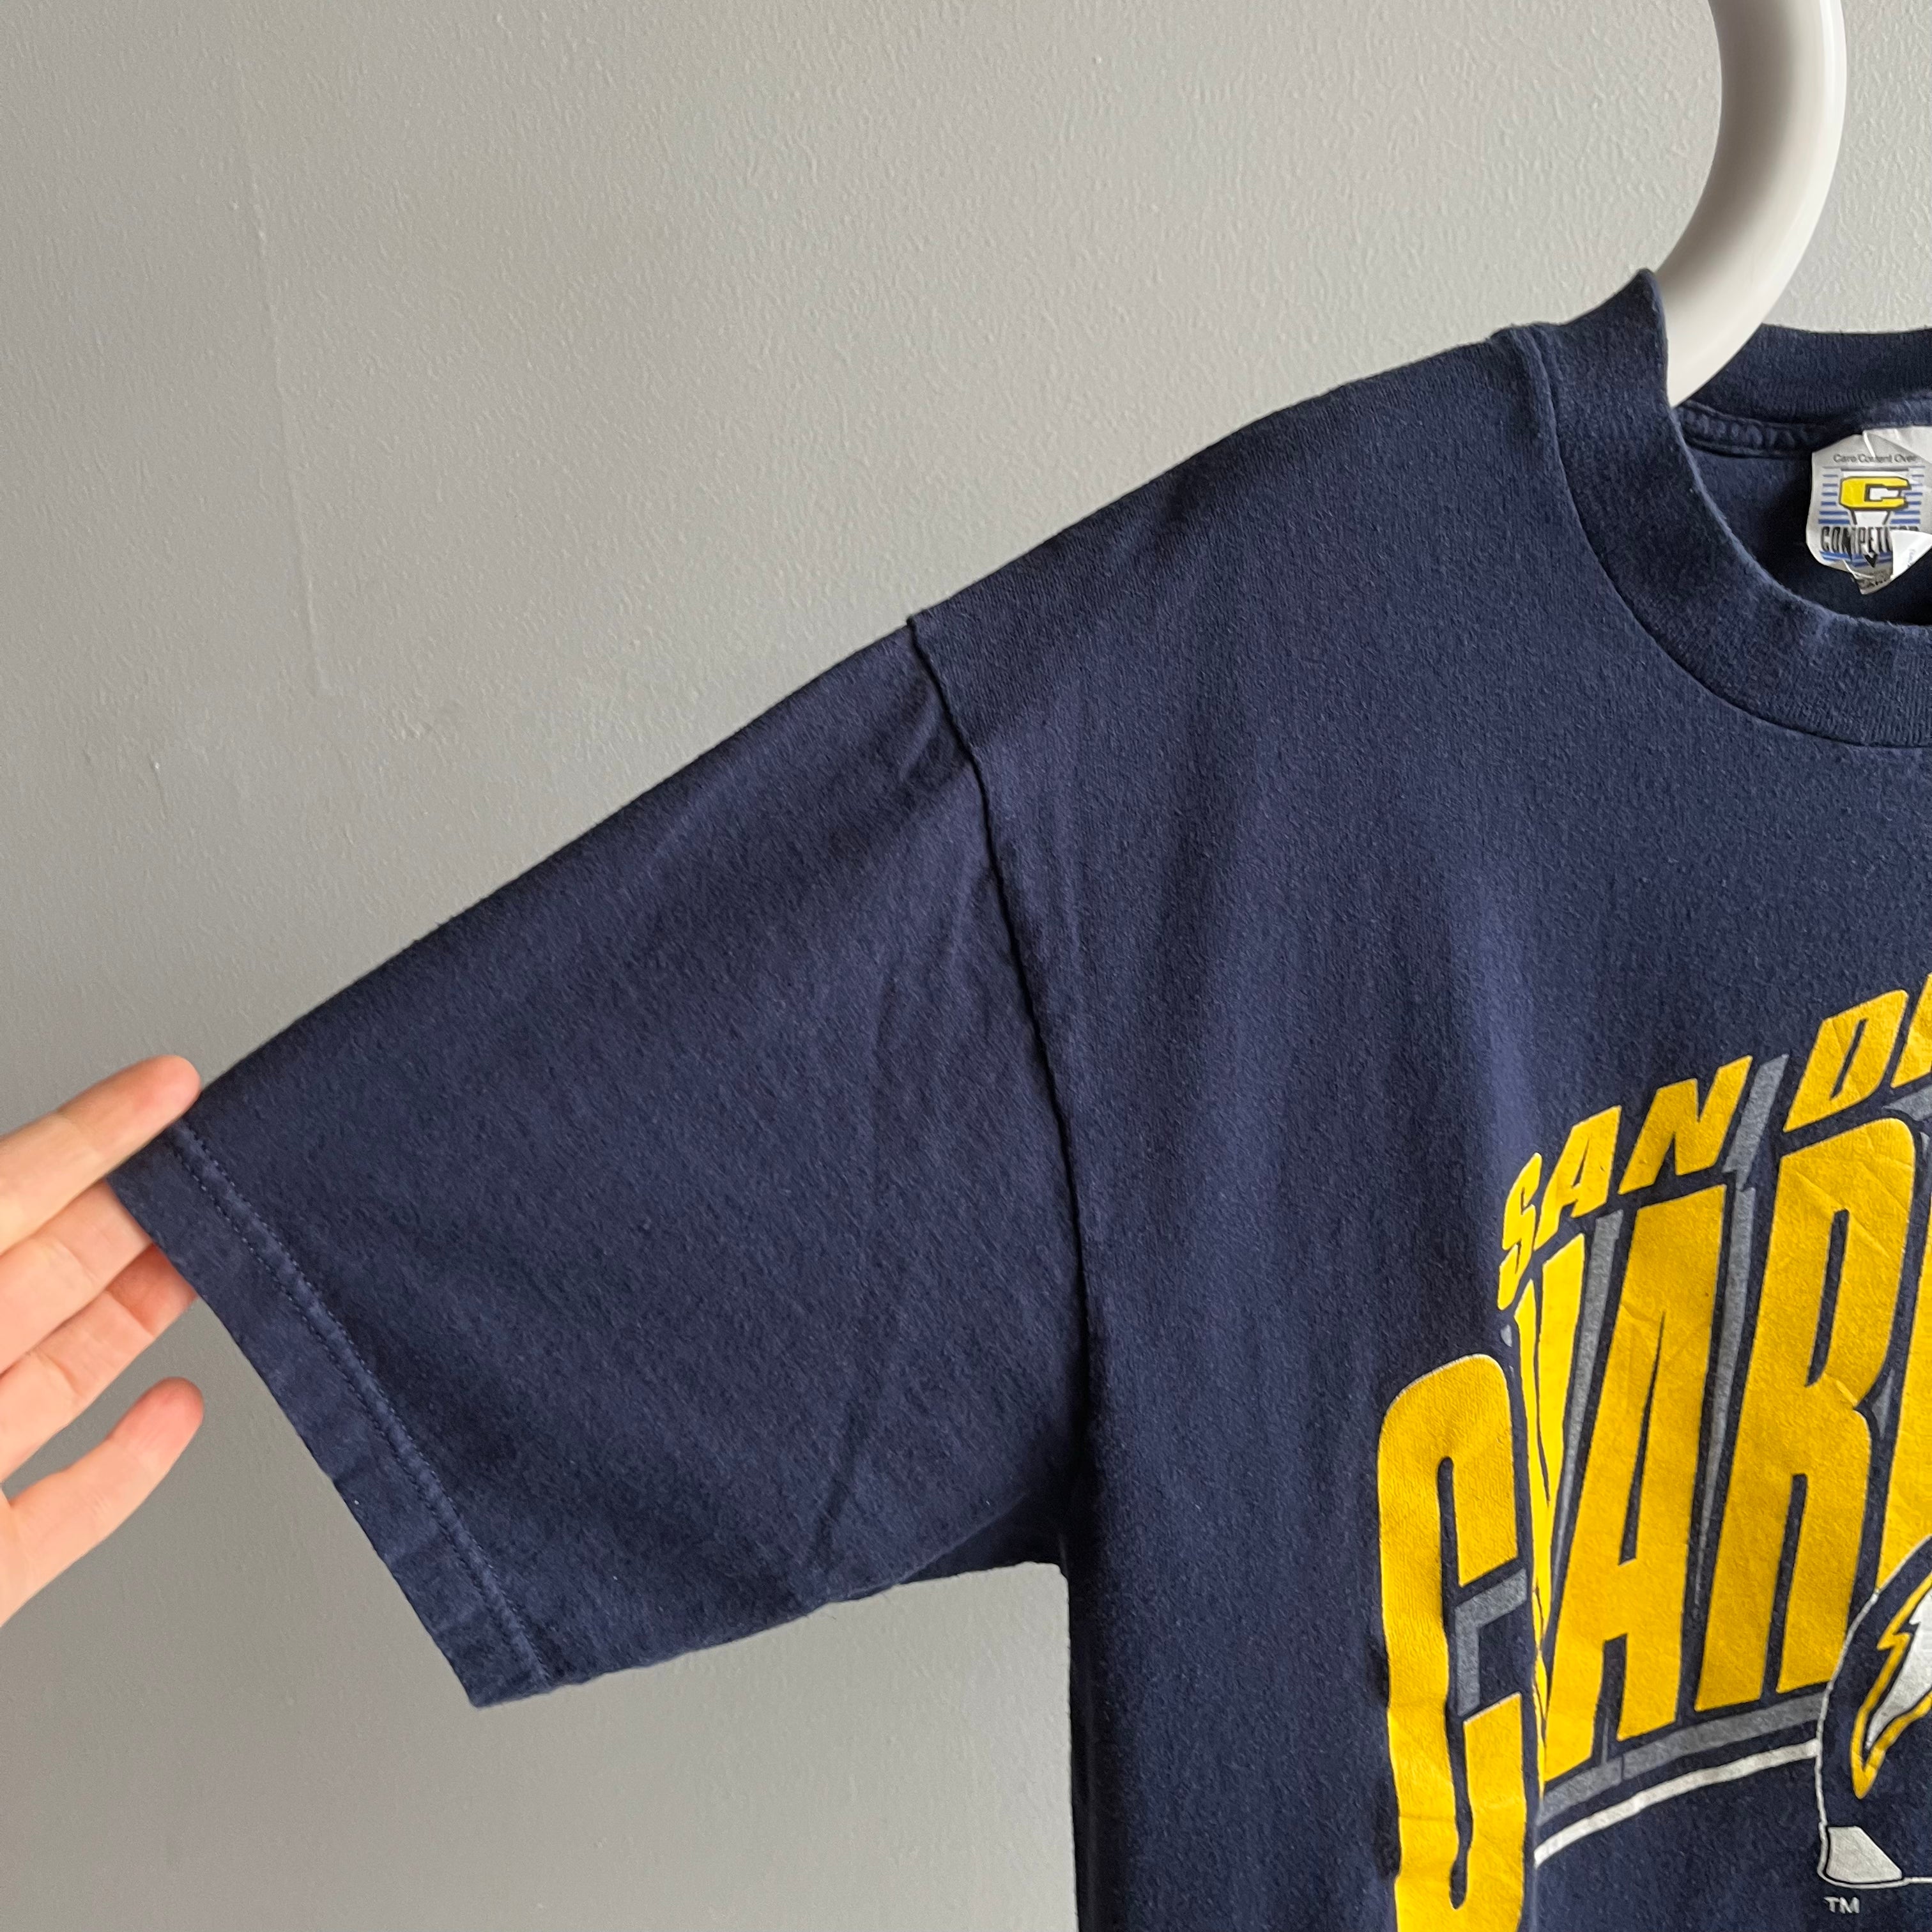 1994 San Diego Chargers NFL T-Shirt (Sorry SD, LA has 'em now) – Red  Vintage Co